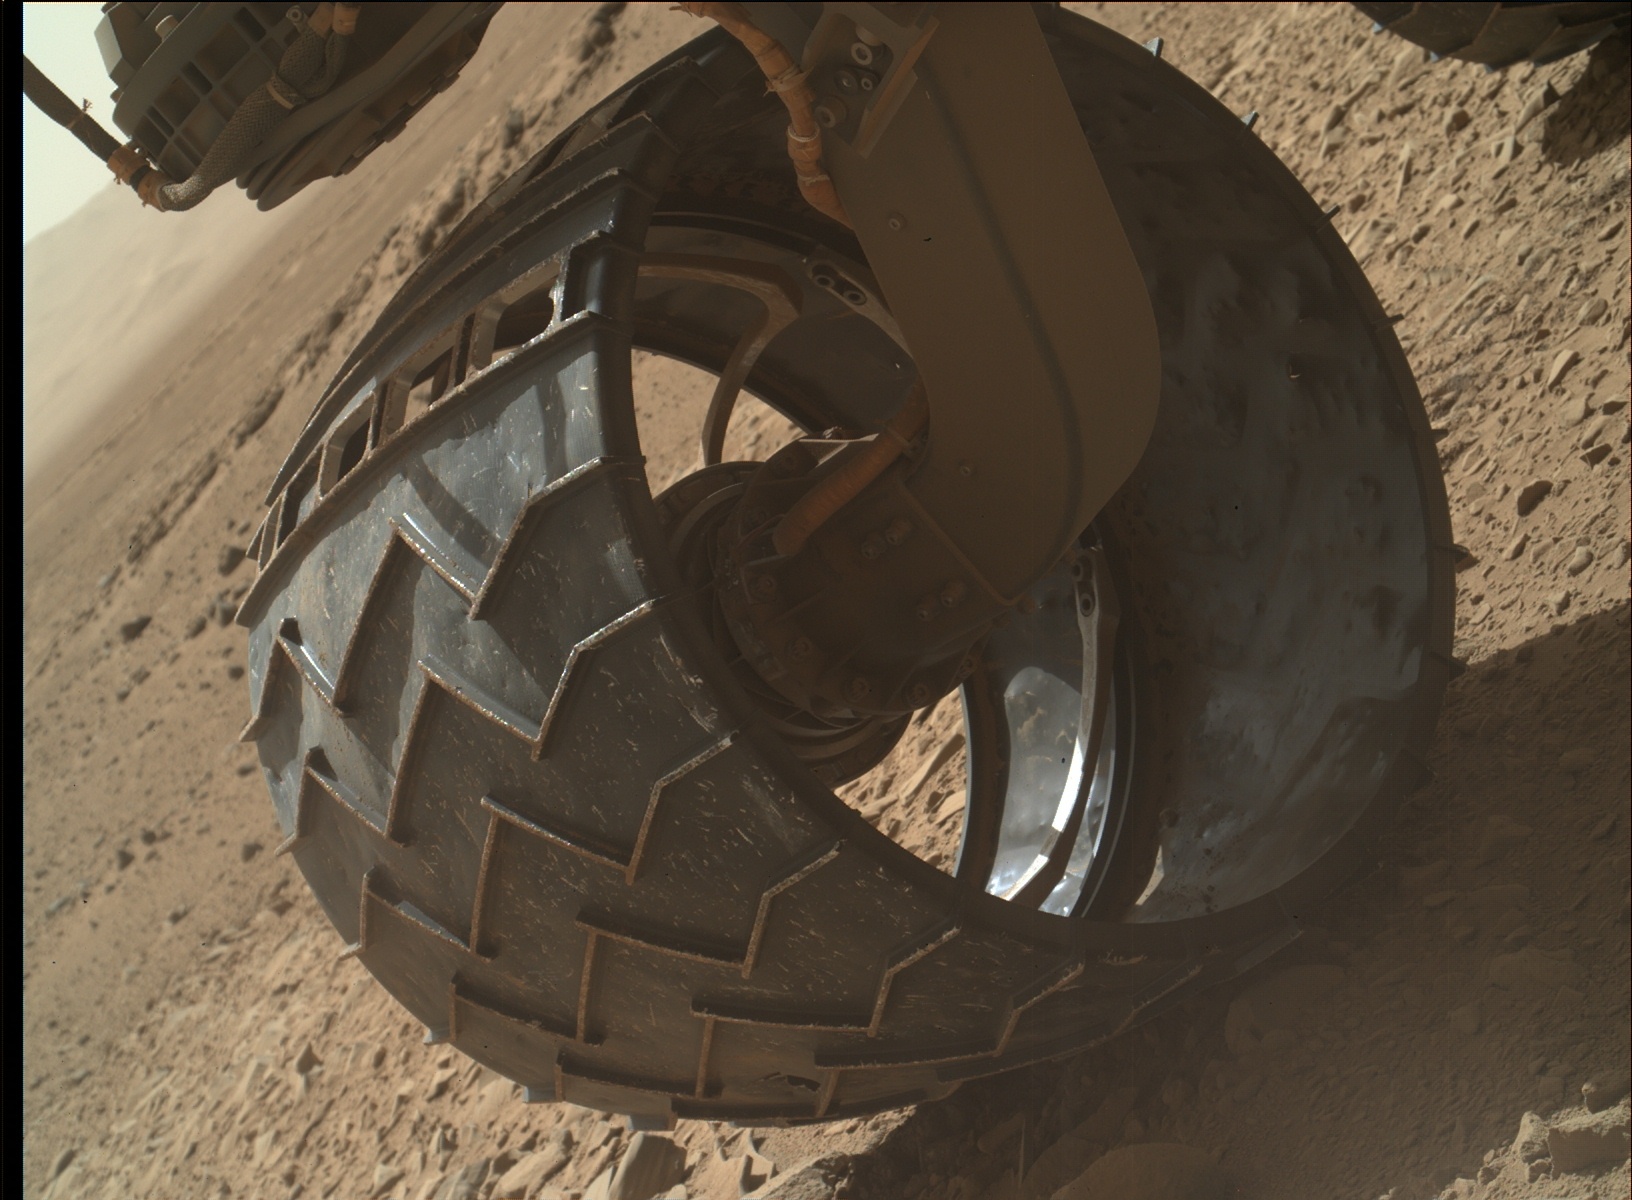 Nasa's Mars rover Curiosity acquired this image using its Mars Hand Lens Imager (MAHLI) on Sol 508